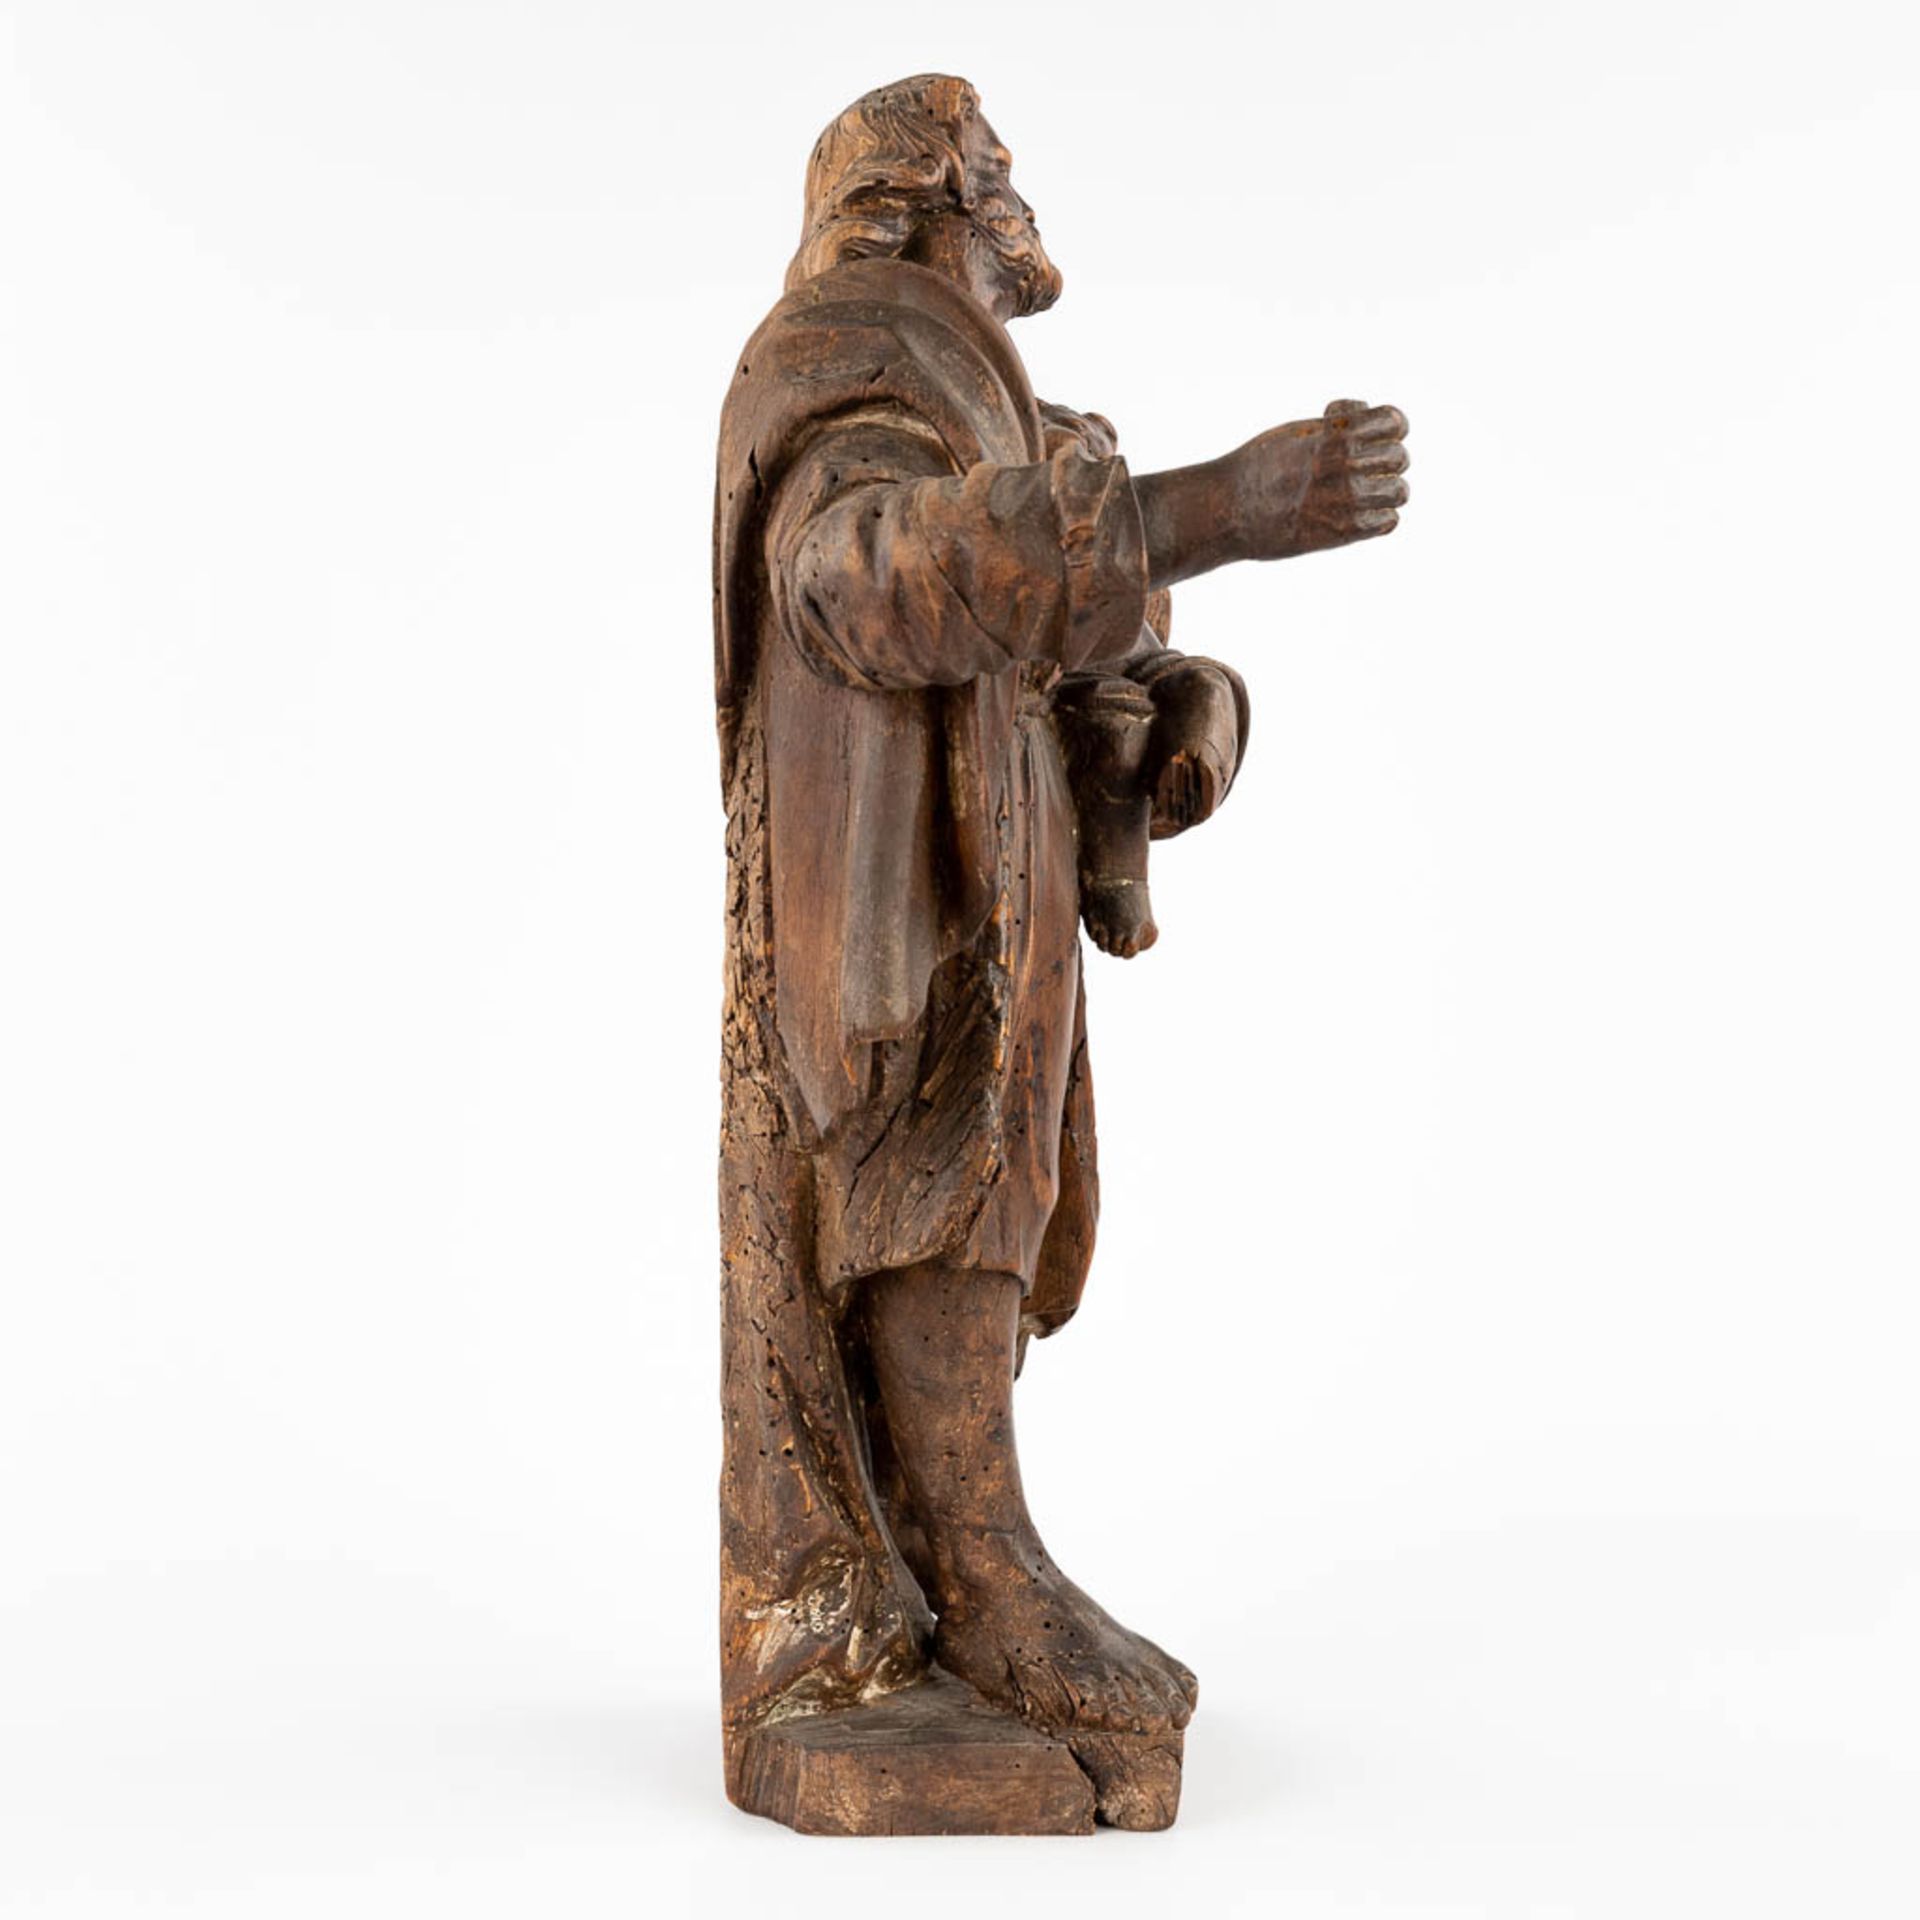 An antique wood-sculpture 'Joseph and baby Jesus', 17th/18th C. (L:14 x W:27 x H:48 cm) - Image 4 of 15